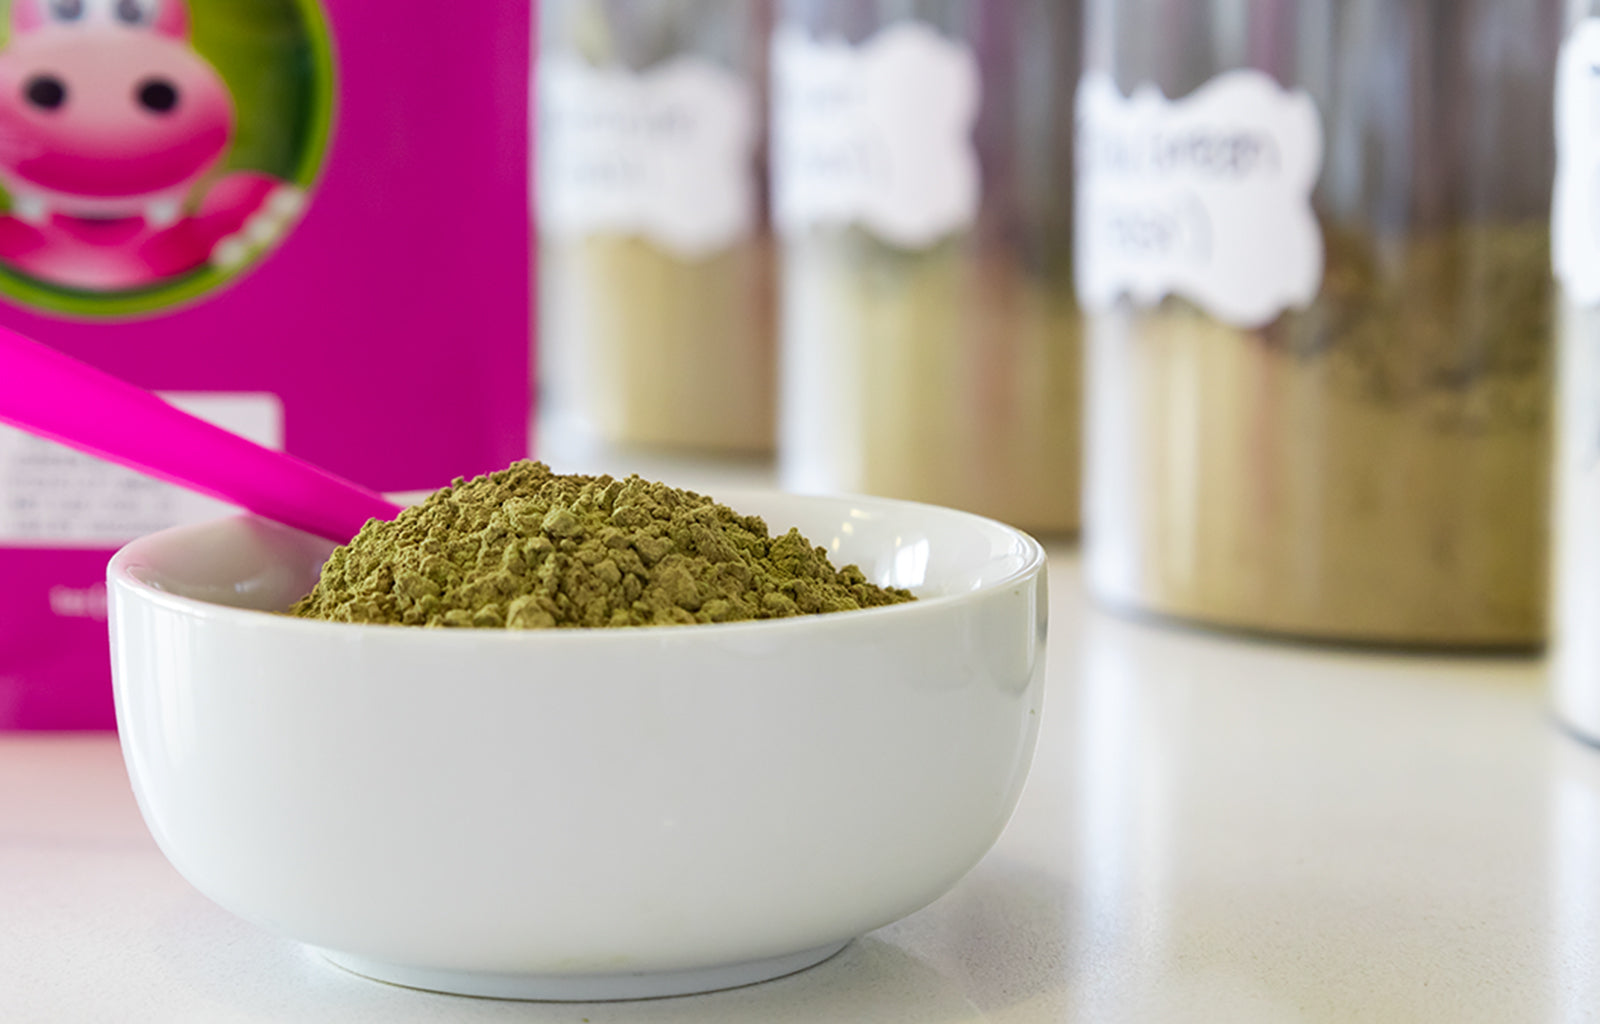 Featured Image depicting a bowl filled with Happy Hippo branded Green Maeng Da (Hyper Hippo) Kratom Powder